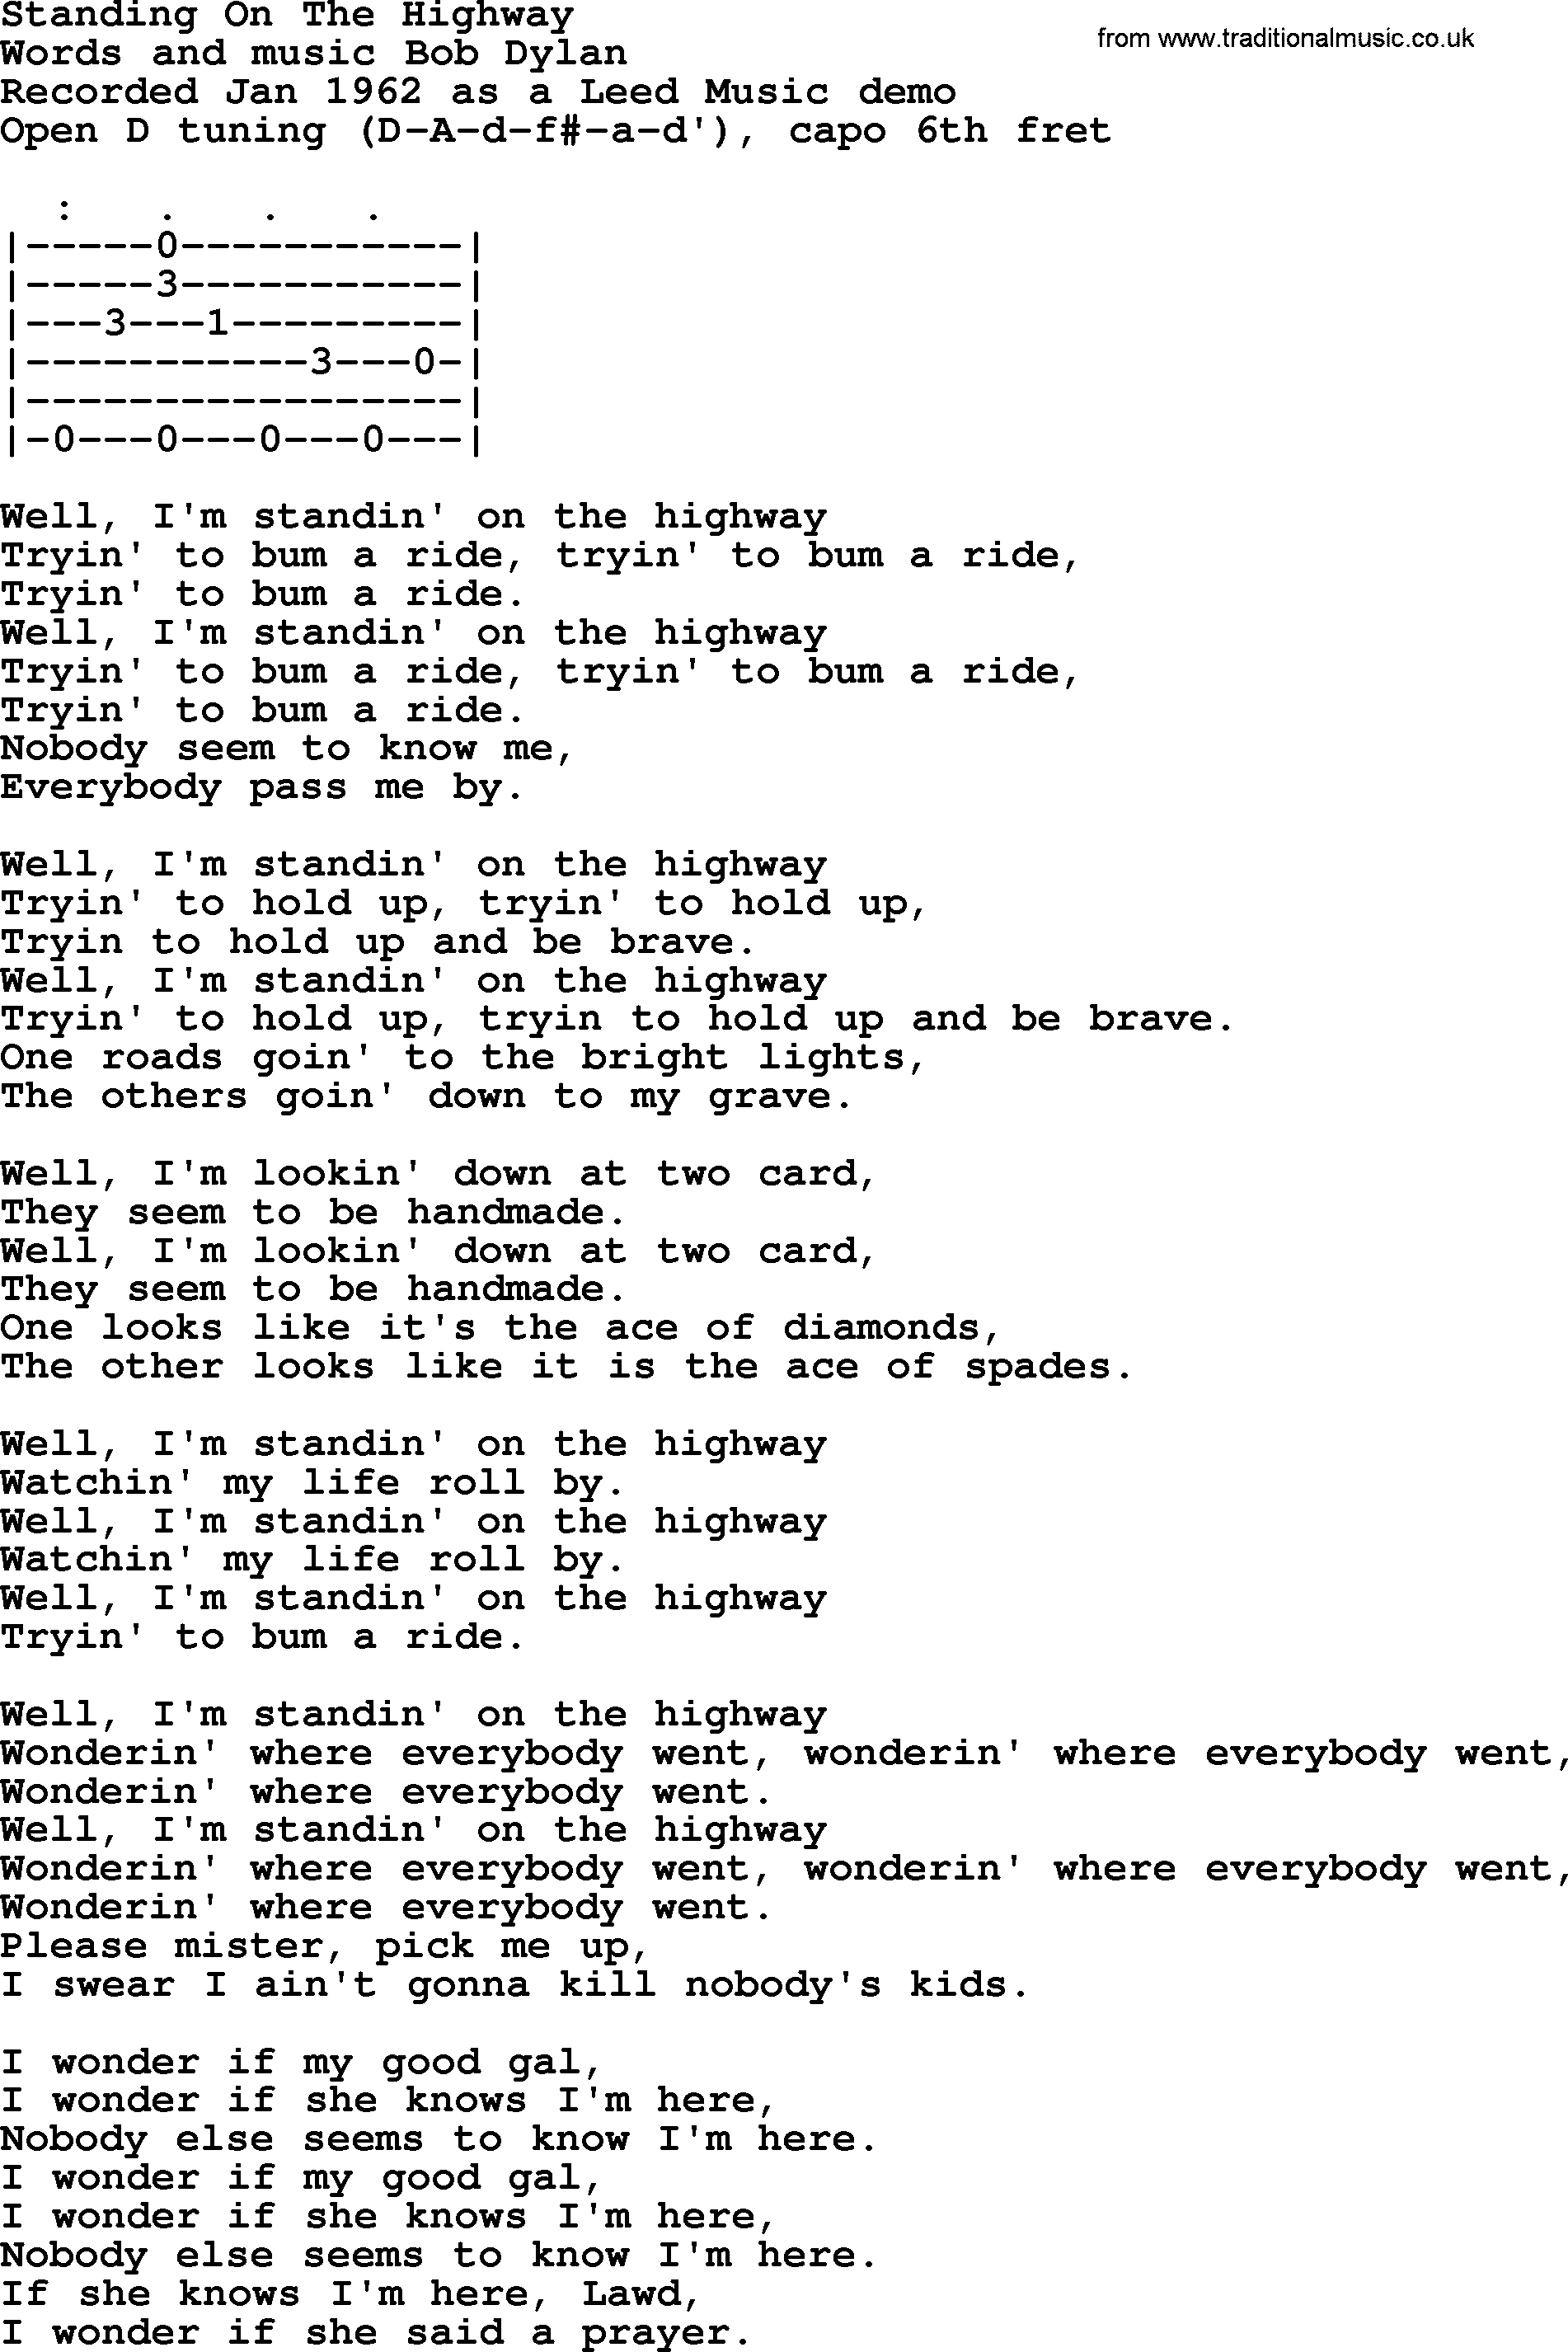 Bob Dylan song, lyrics with chords - Standing On The Highway